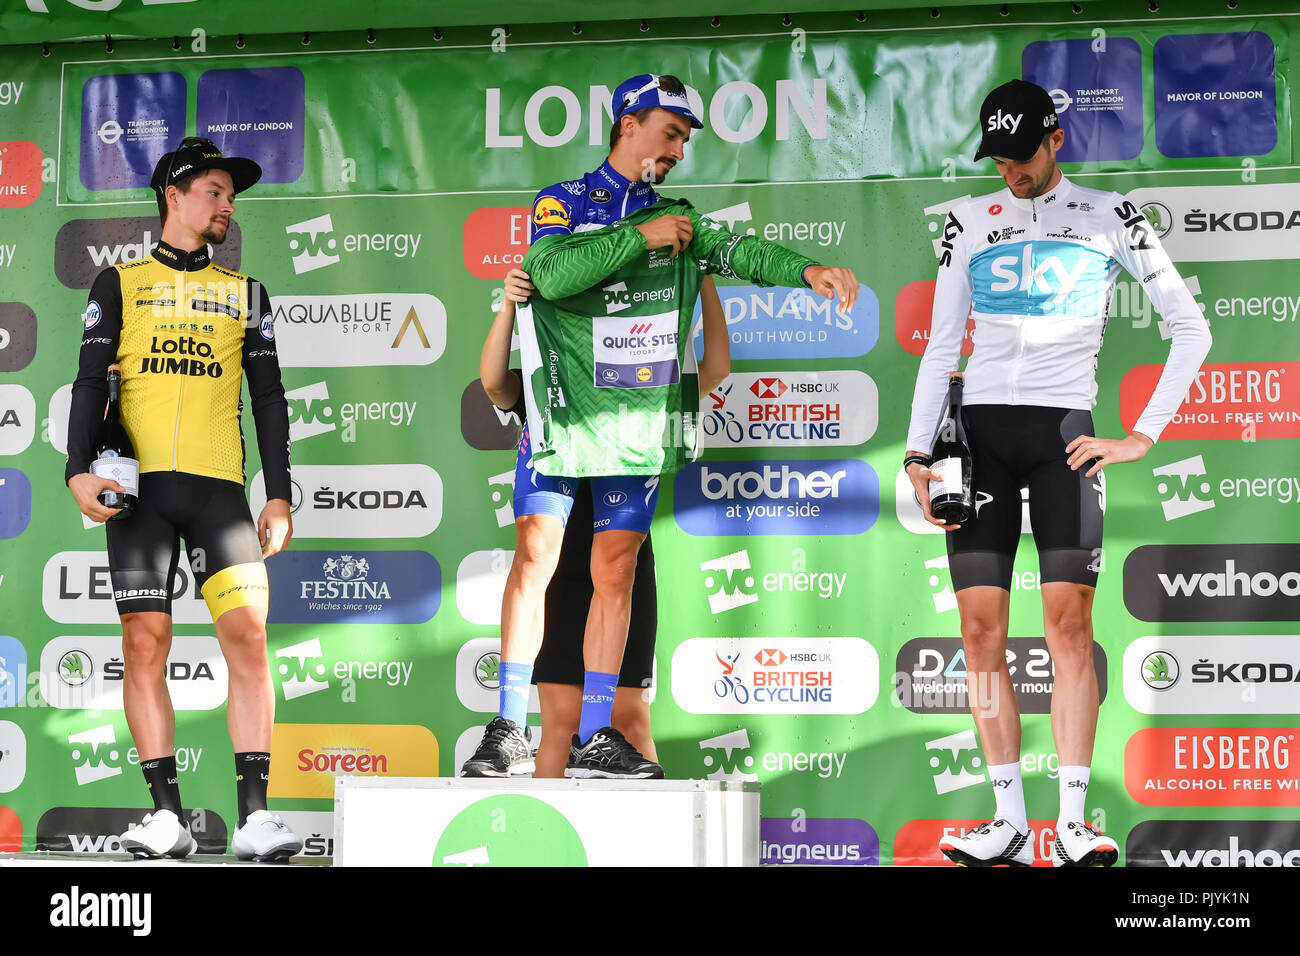 London, UK. 09th Sep, 2018. Julian Alaphilippe (Quick-Step Floors) was crowned the 2018 OVO Energy Tour of Britain in London on Sunday as Team Sky's Wout Poels won the 2nd and Team Lotto NL - Jumbo's Primoz Roglic in 3rd place on final stage at the Winner's Presentation during 2018 OVO Energy Tour of Britain - Stage Eight: The London Stage on Sunday, September 09, 2018, LONDON ENGLAND: Credit: Taka Wu/Alamy Live News Stock Photo